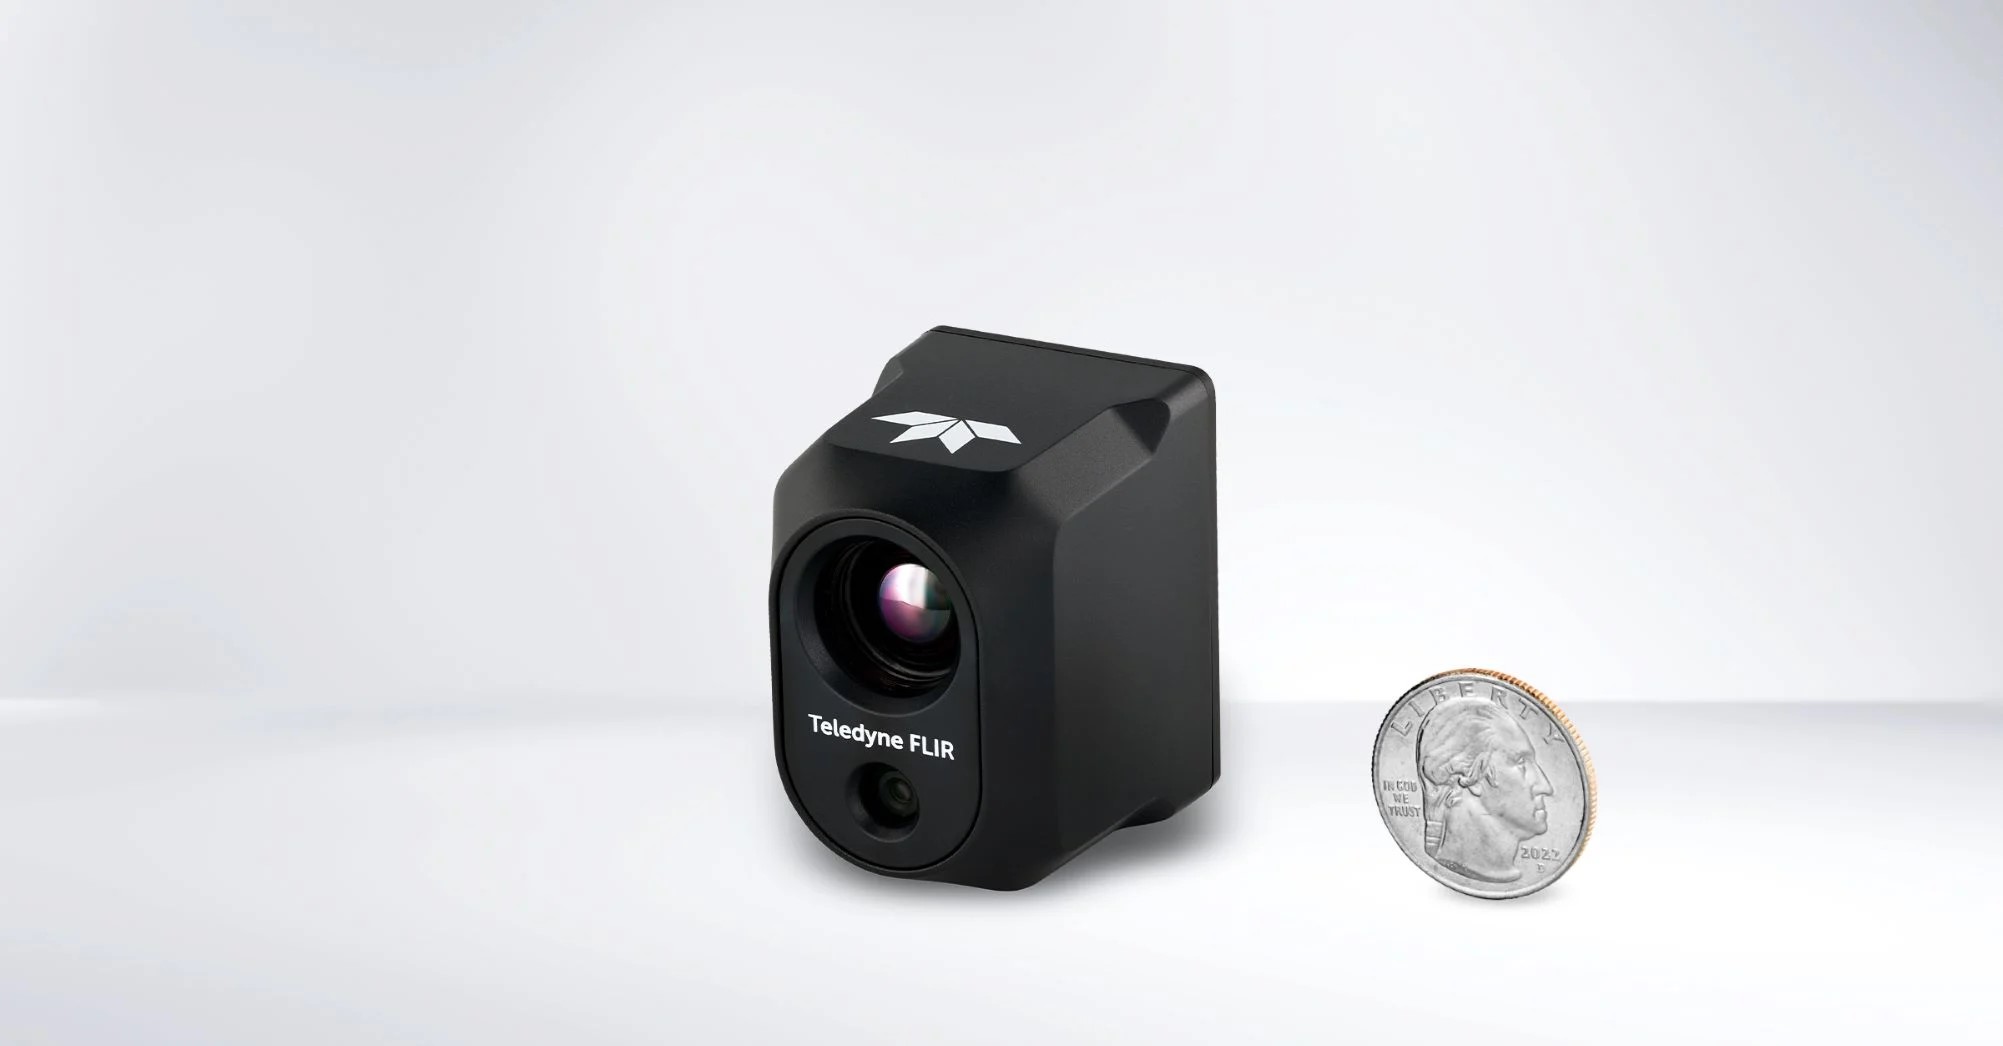 The new camera module pairs a 640 x 512 resolution radiometric Boson thermal camera and a 64 MP visible camera in a size, weight, and power (SWaP) optimised design for out-of-the-box integration